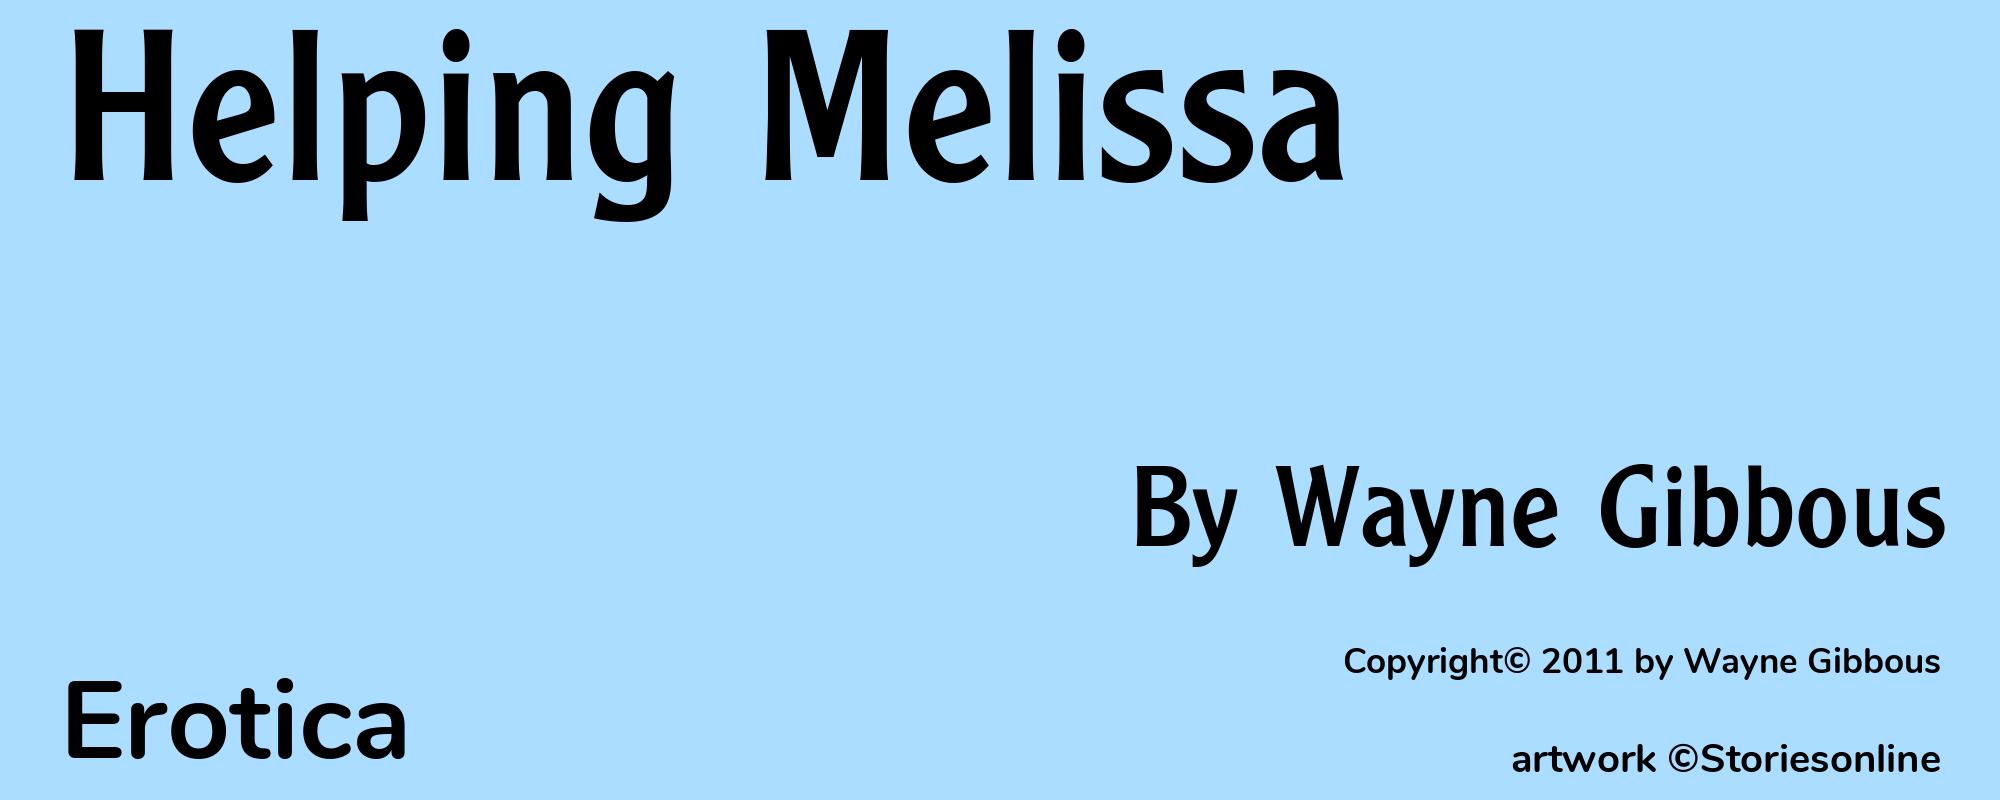 Helping Melissa - Cover